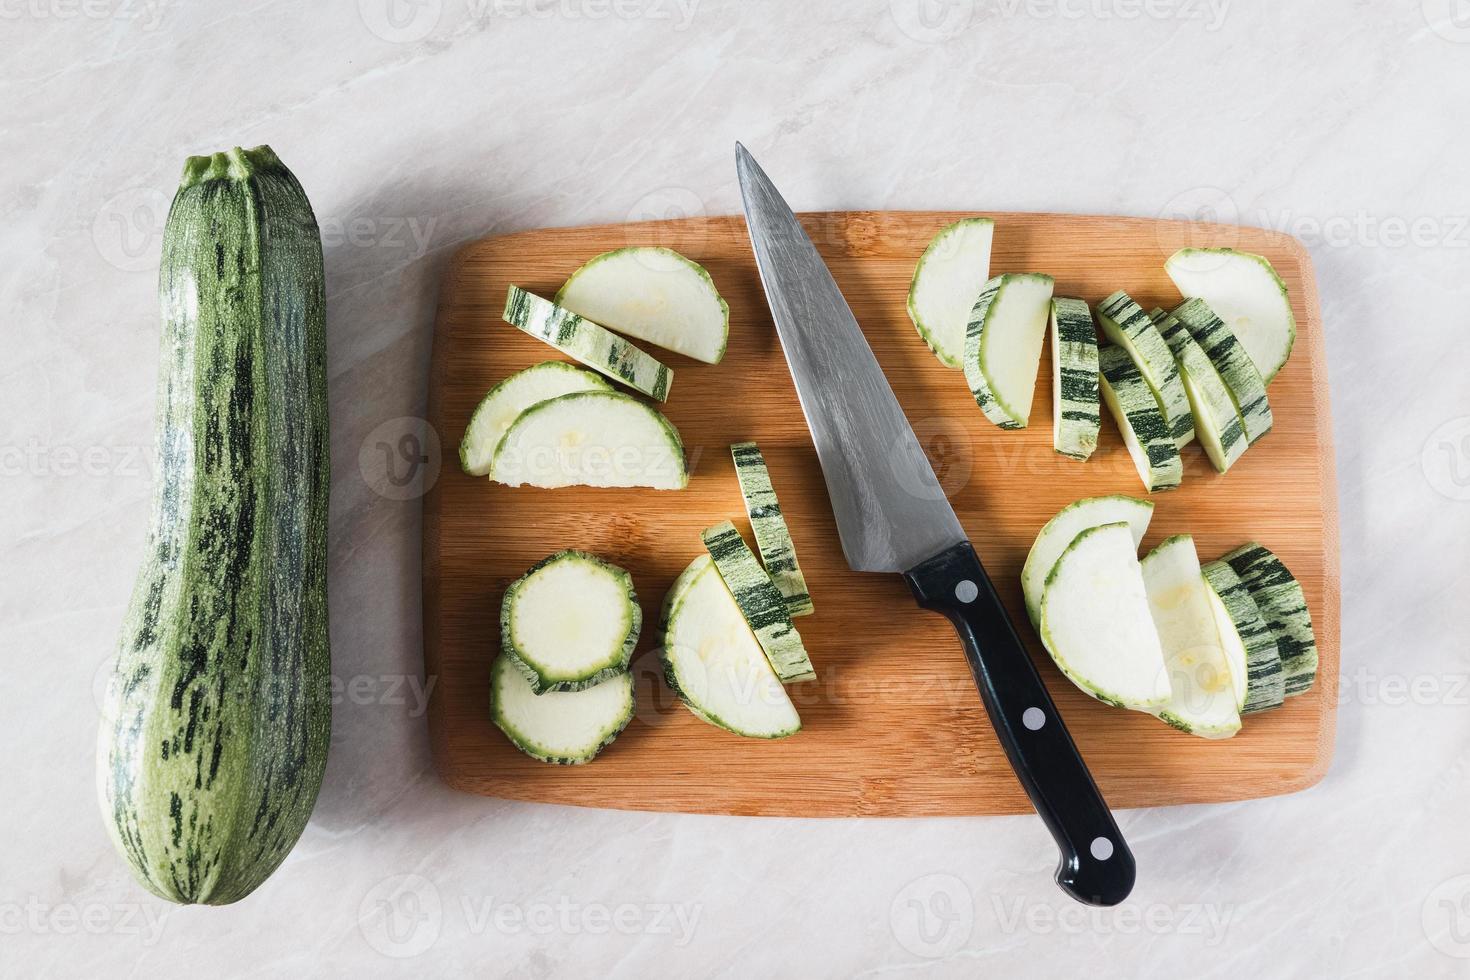 Cutting zucchini on wooden board, whole squash, knife and slices, overhead view photo